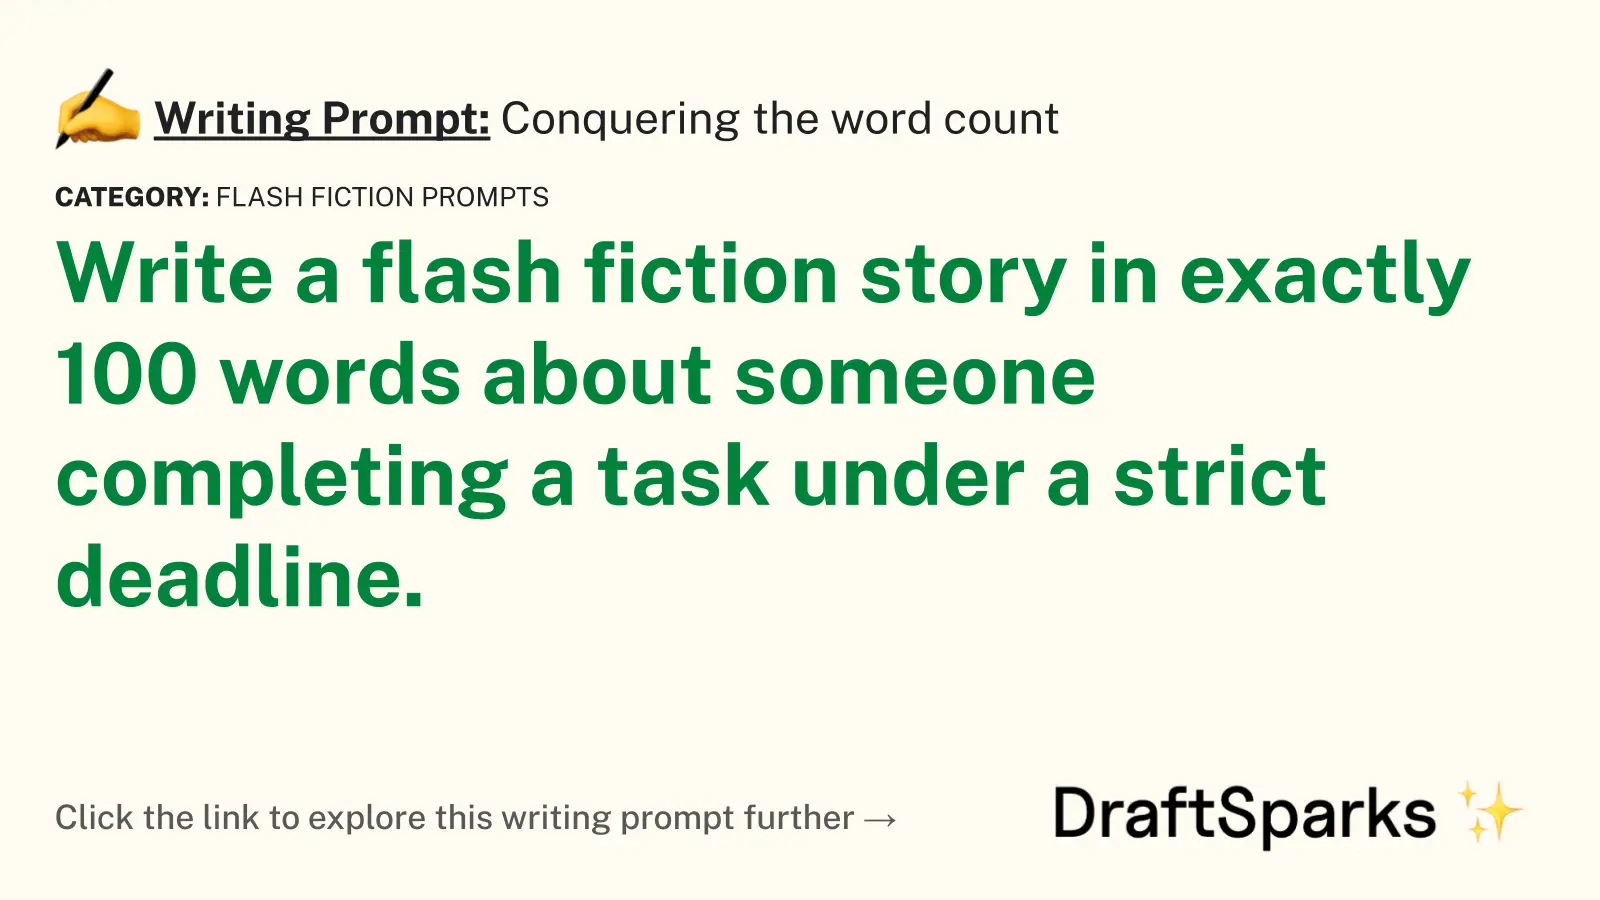 Conquering the word count